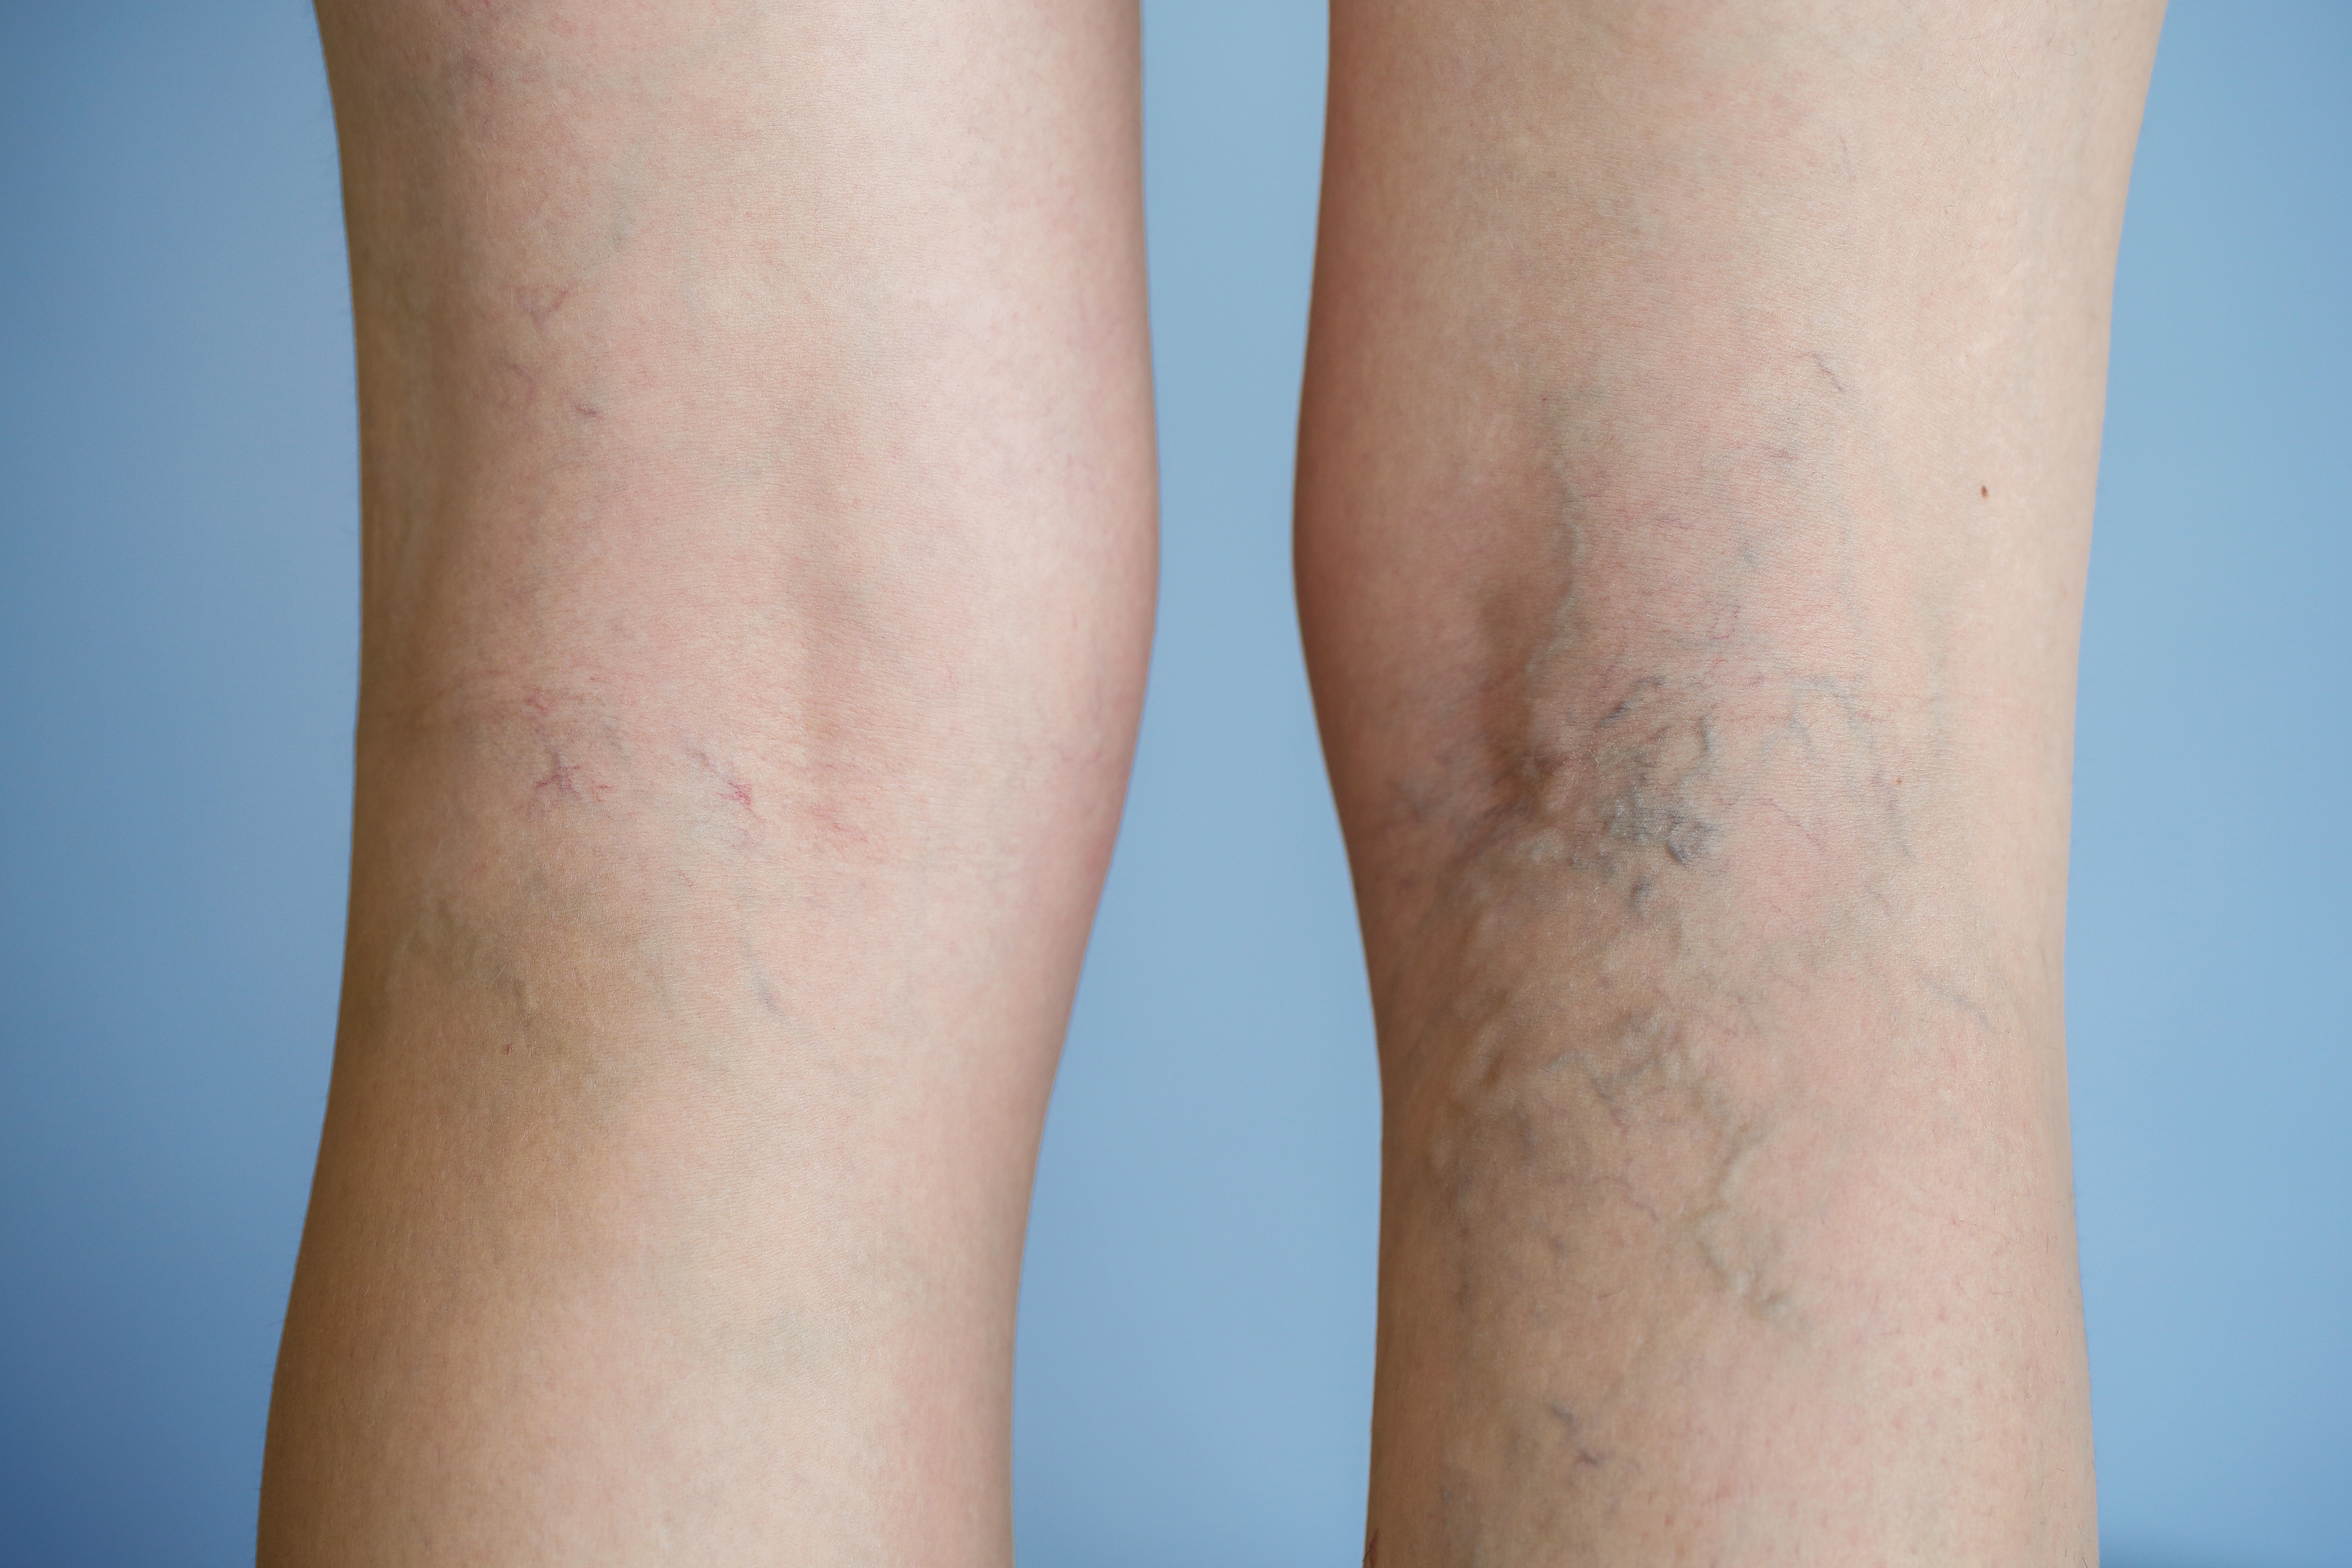 A Spider Vein Specialist Can Help You Look And Feel Better